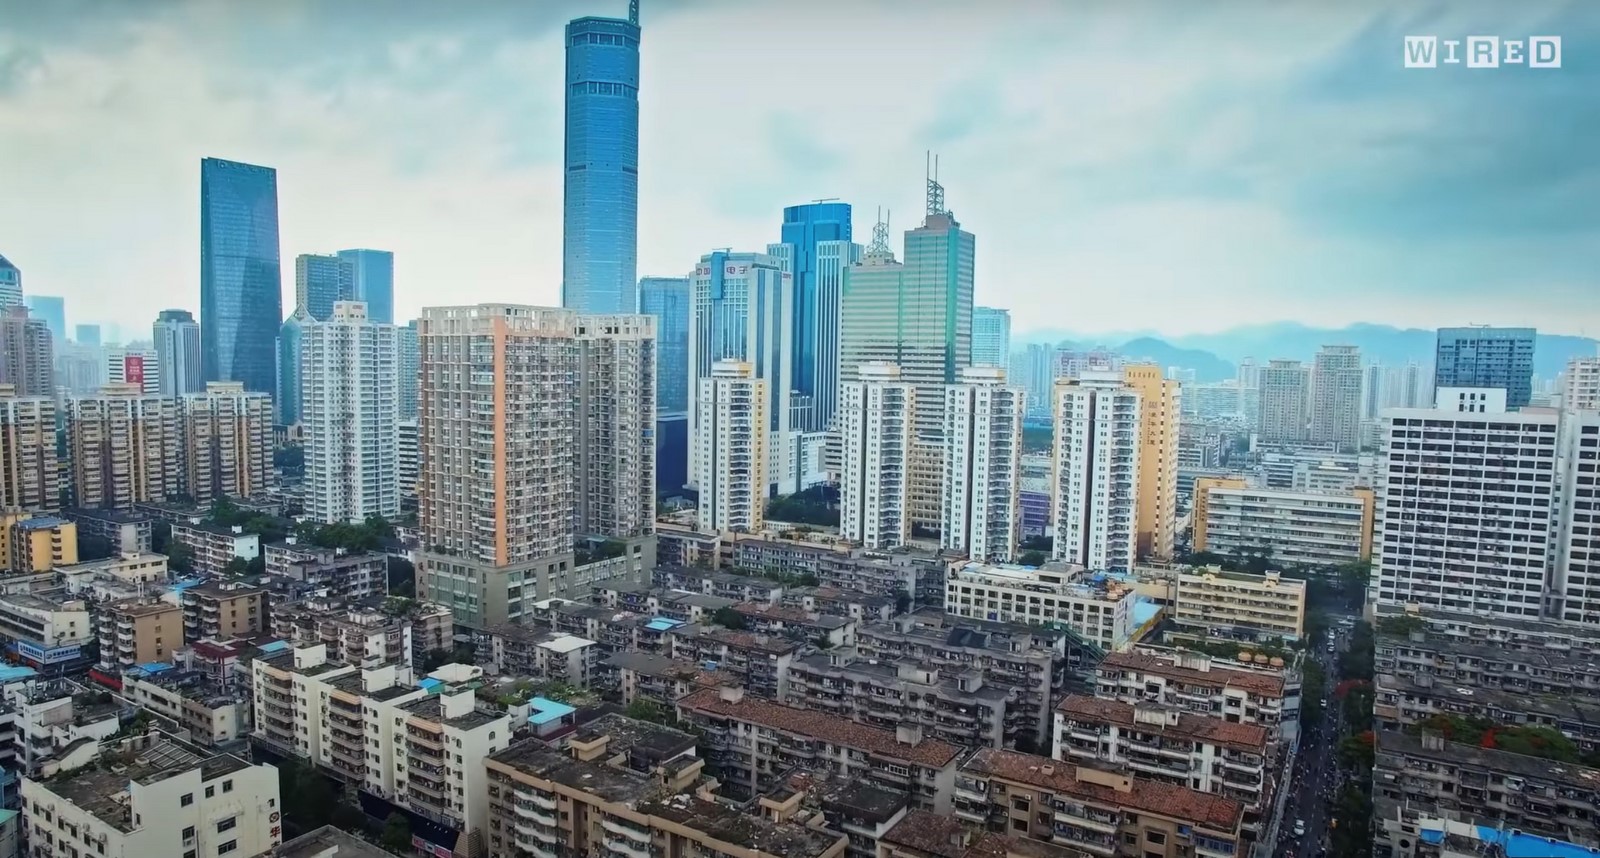 Youtube for Architects: Shenzhen: The Silicon Valley of Hardware - Future Cities - Sheet1